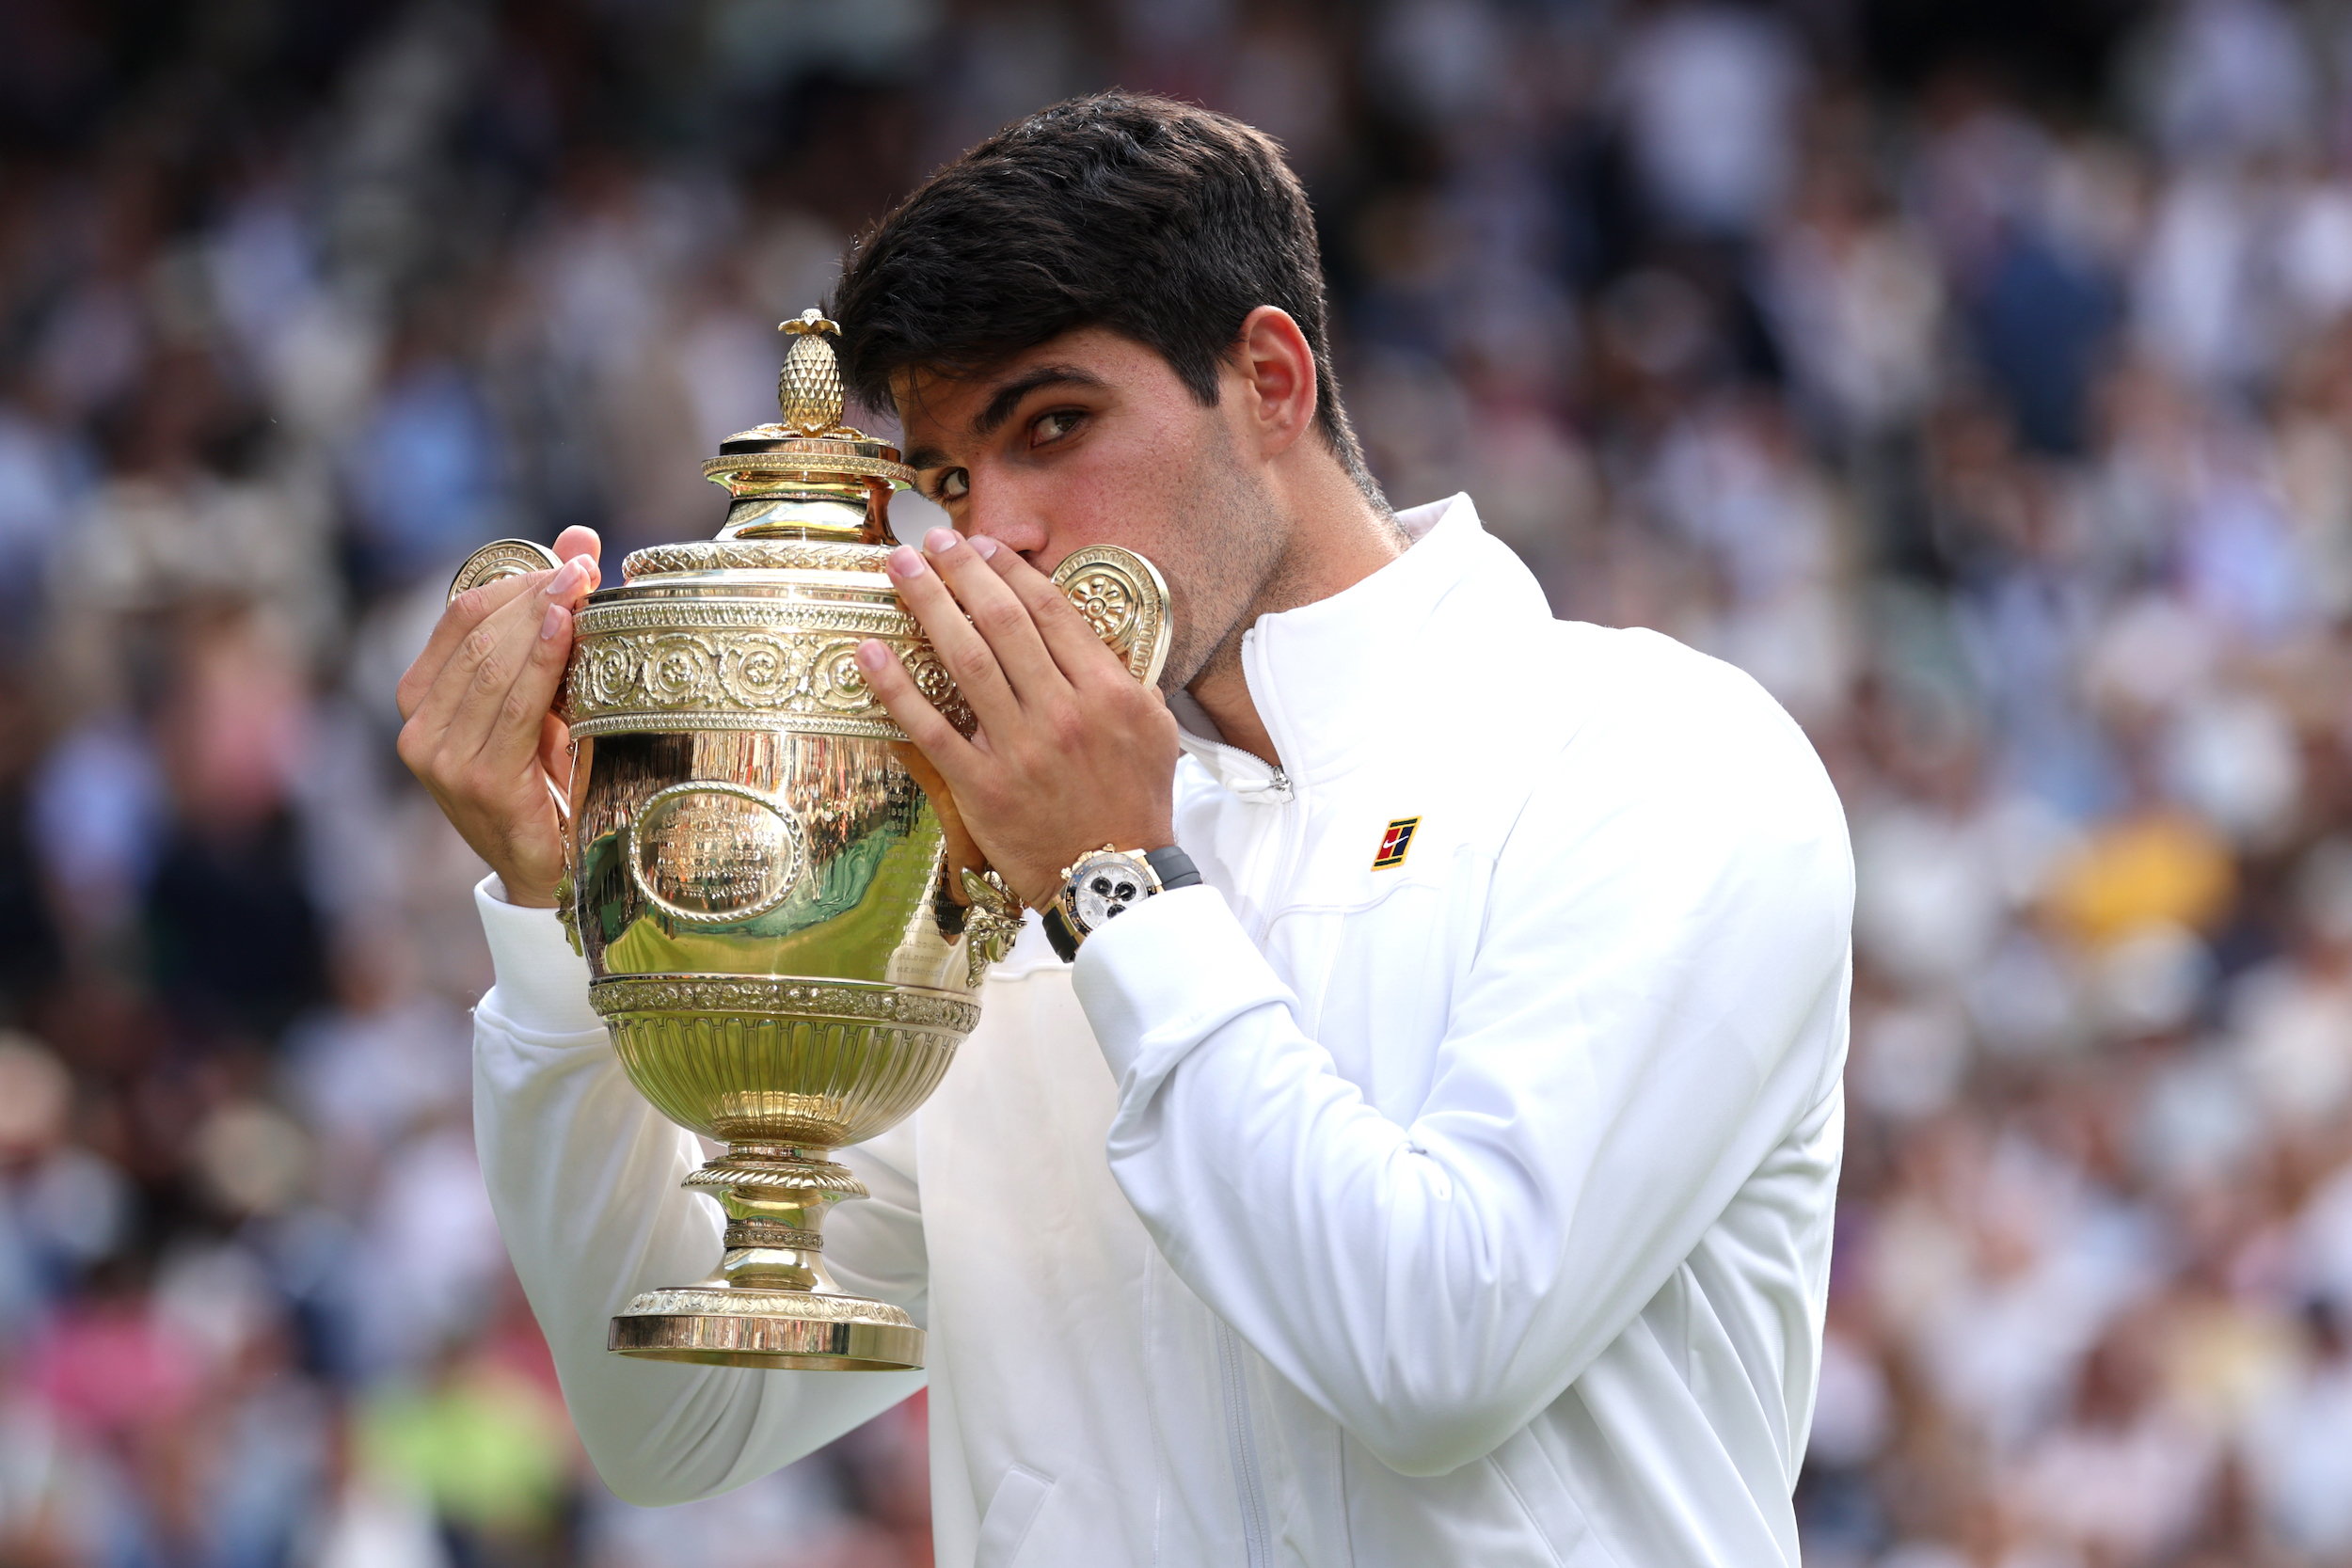 Carlos Alcaraz of Spain kisses the Gentlemen's Singles Trophy following victory against Novak Djokovic of Serbia in the Gentlemen's Singles Final during day fourteen of The Championships Wimbledon 2024 at All England Lawn Tennis and Croquet Club on July 14, 2024 in London, England. (Photo by Clive Brunskill/Getty Images)